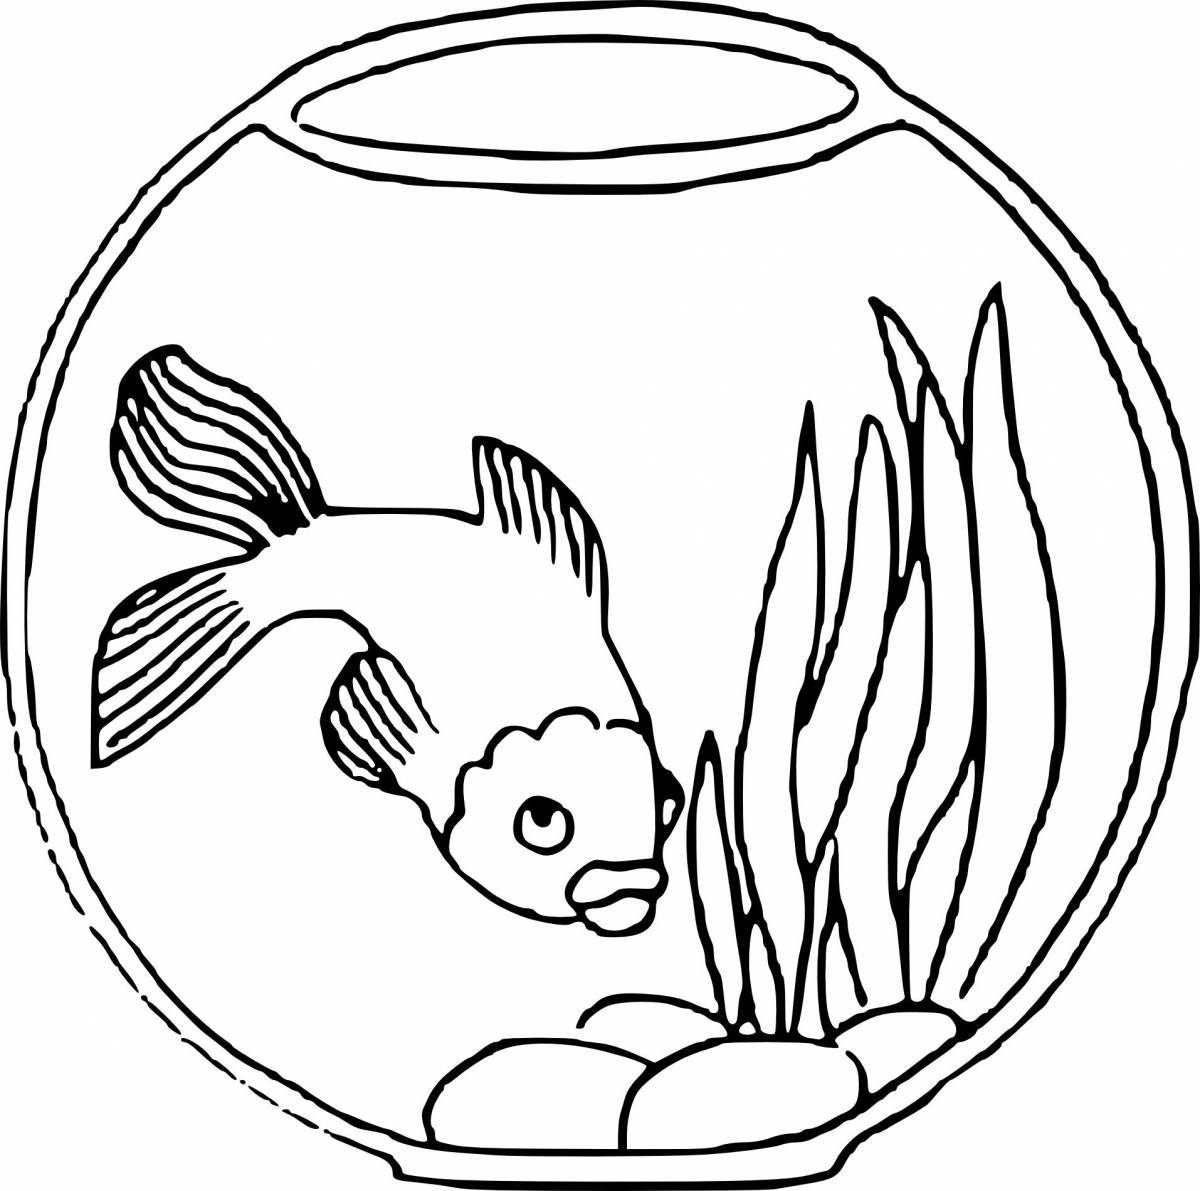 Colorful fish tank coloring page for kids